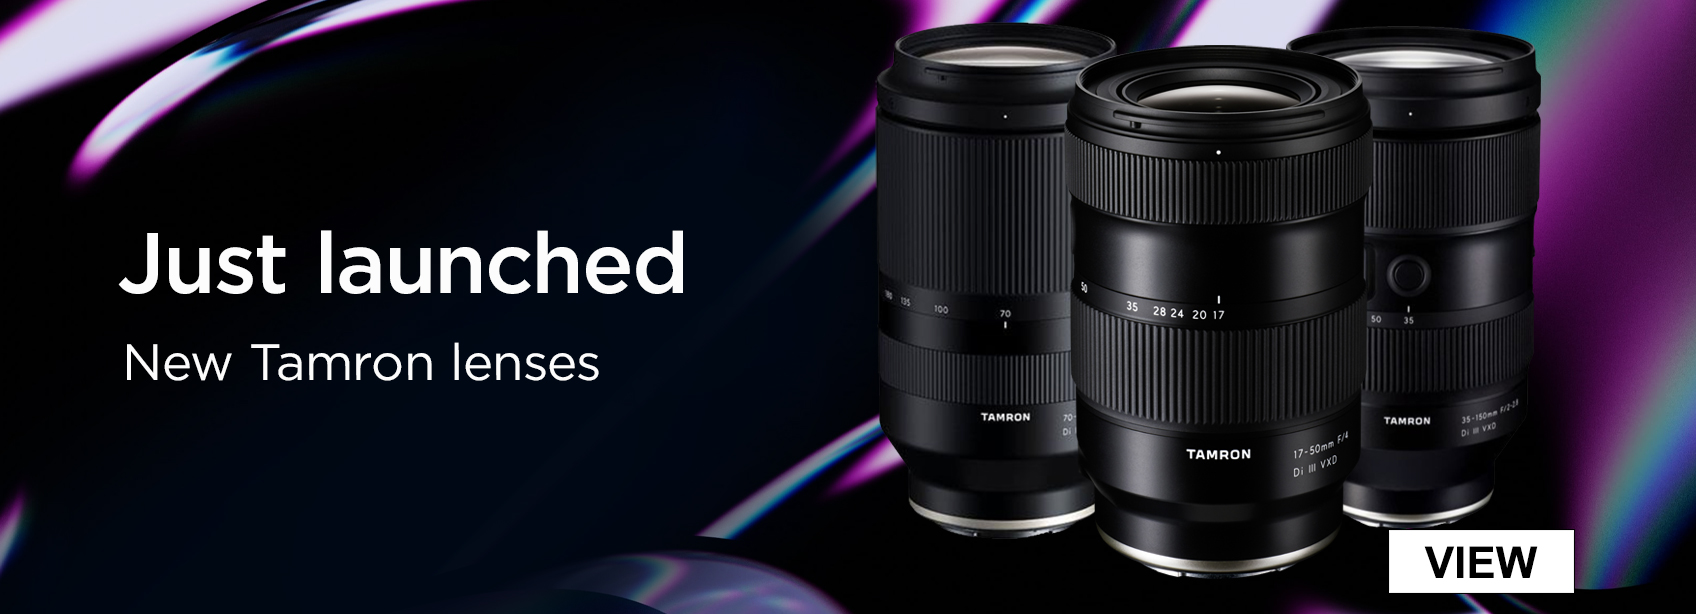 Just launched new tamron lenses